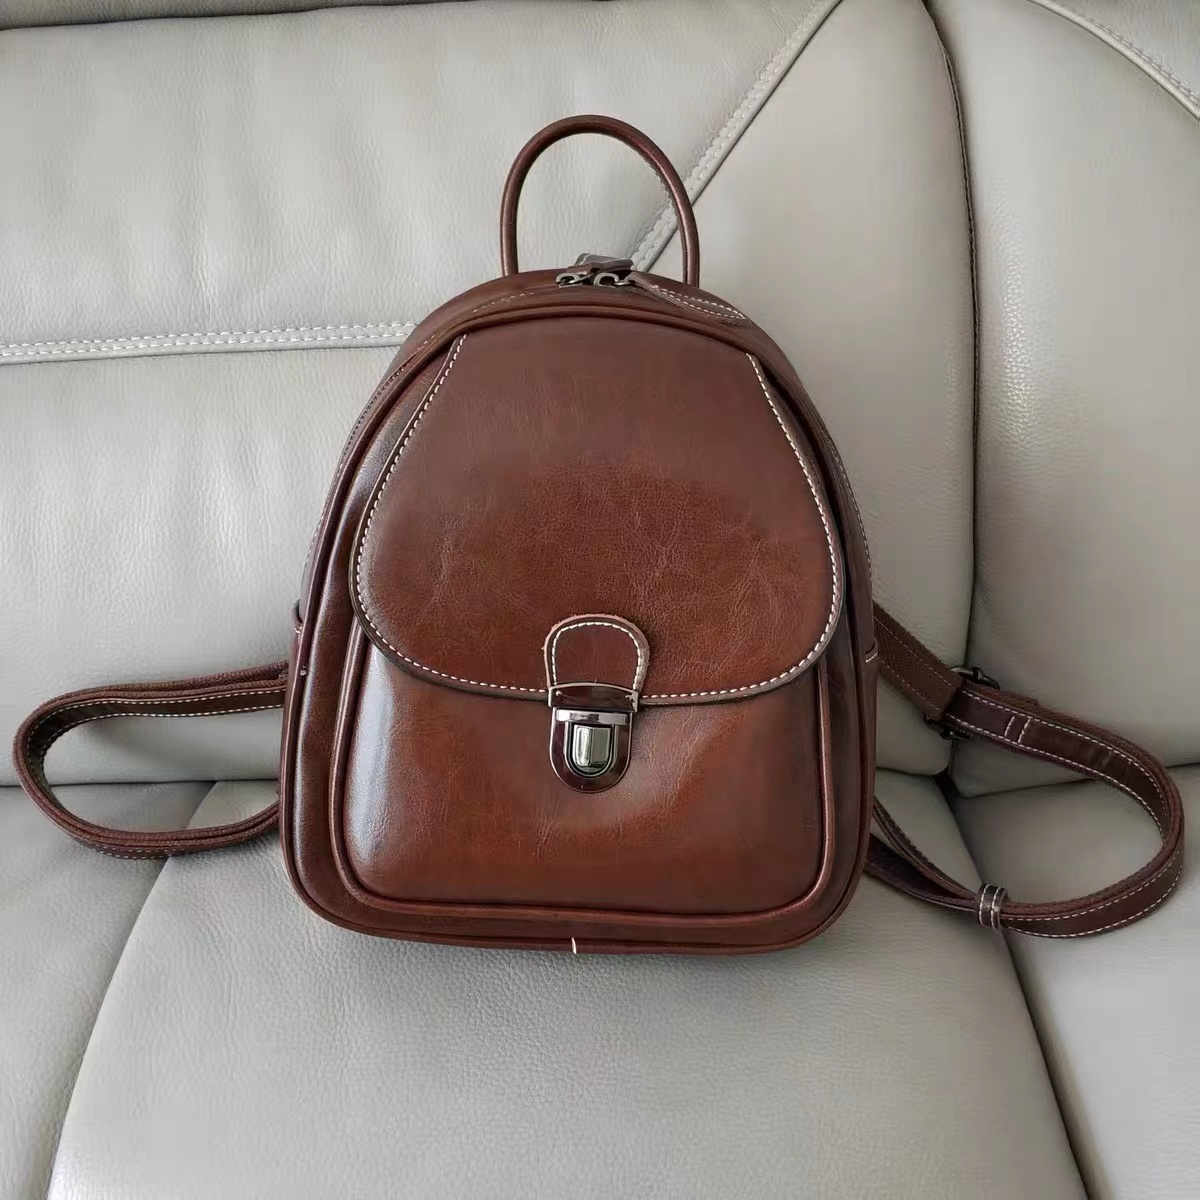 Women's Genuine Leather Backpacks with Flap Buckle photo review